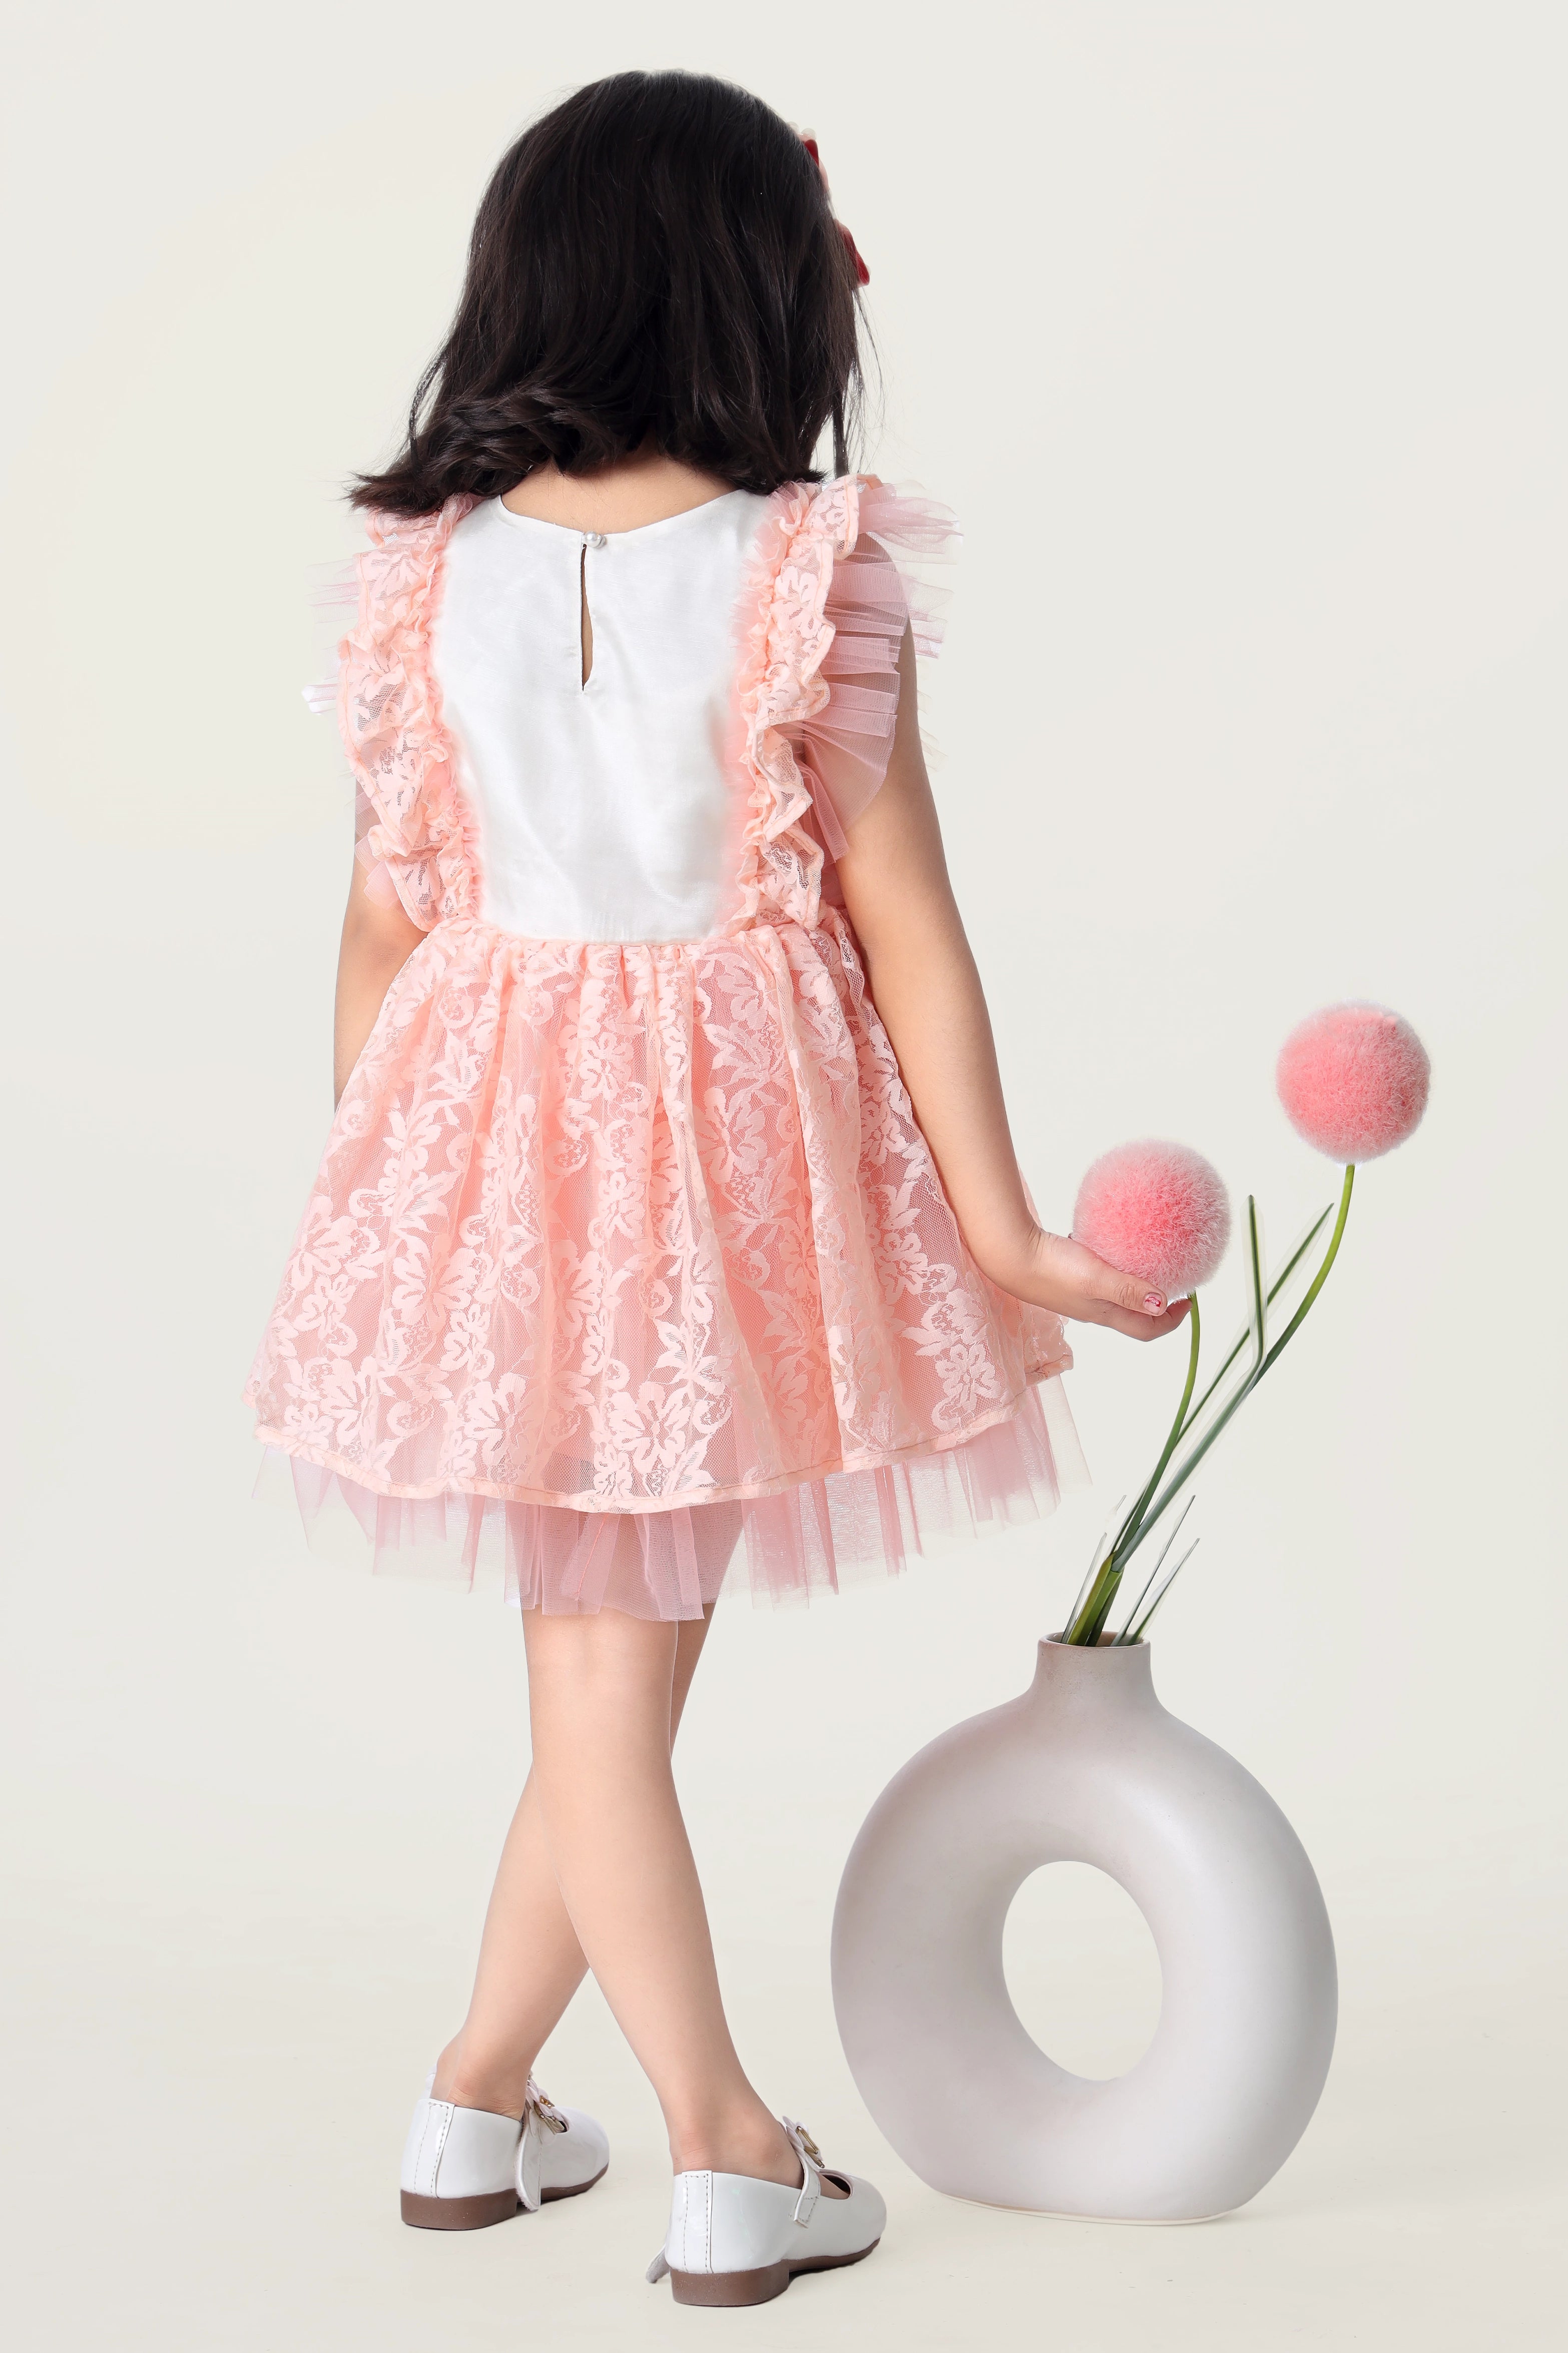 Off White Cotton Gown For Girls | Gowns for girls, Cotton gowns, Gowns